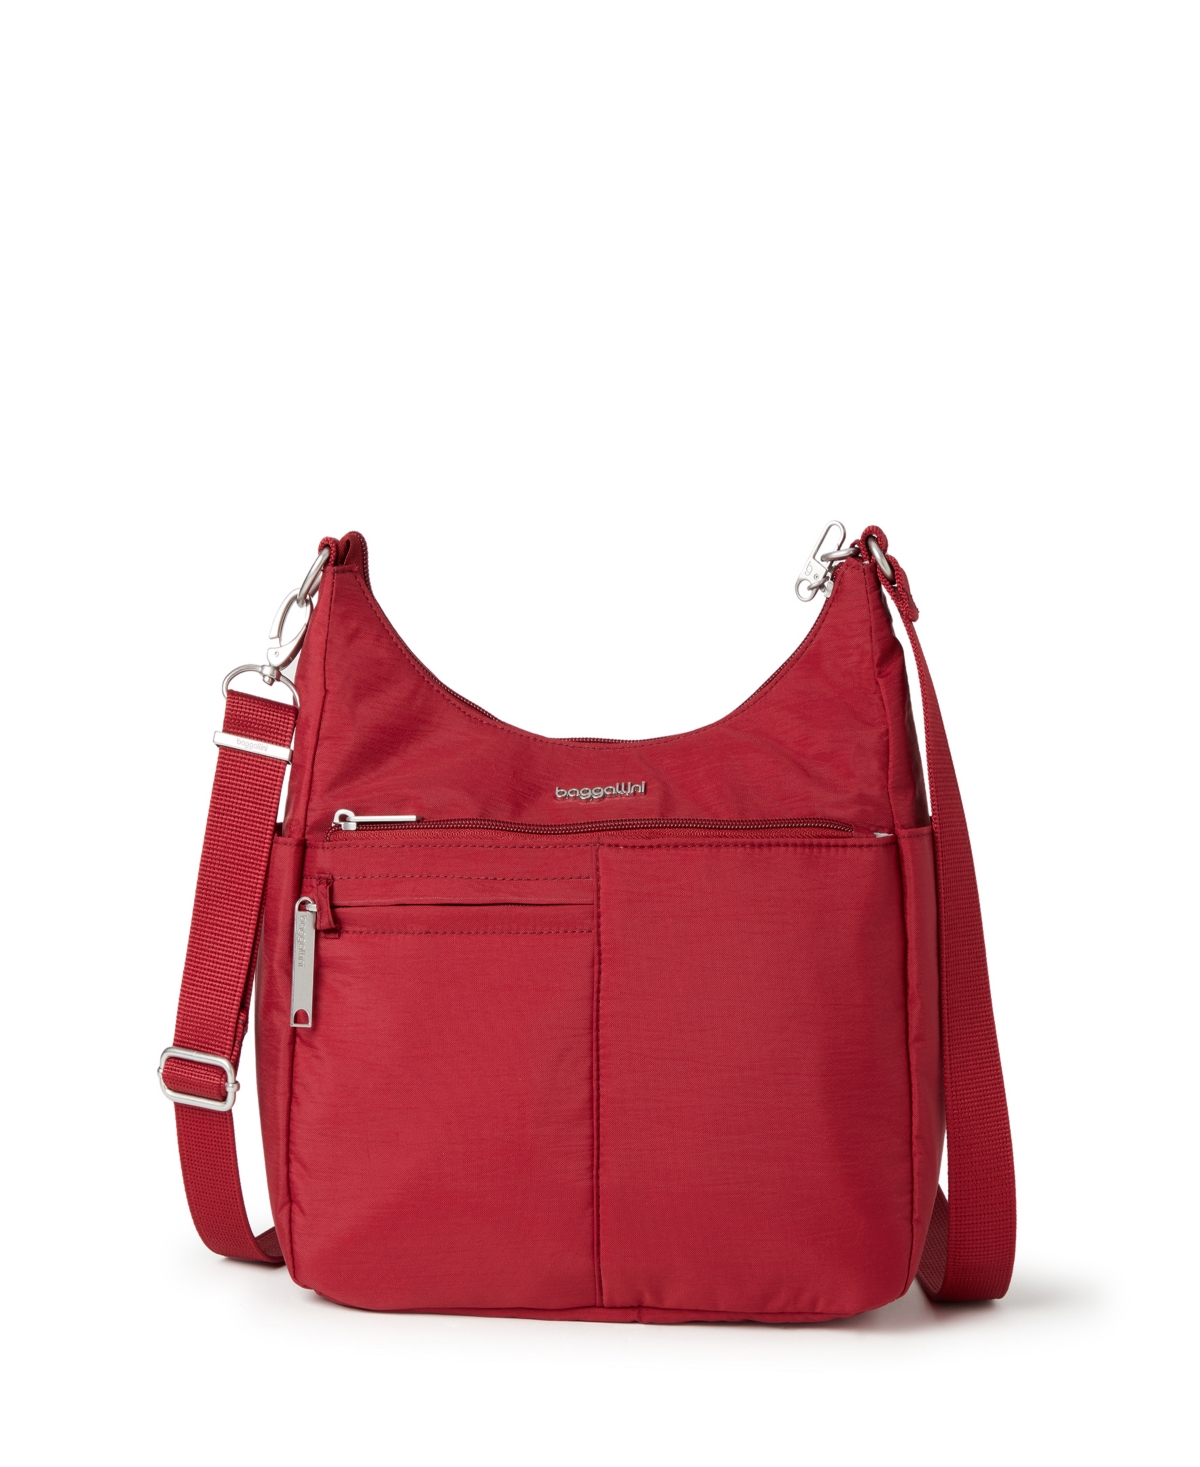 Anti-Theft Free Time Crossbody Bag - Ruby Red